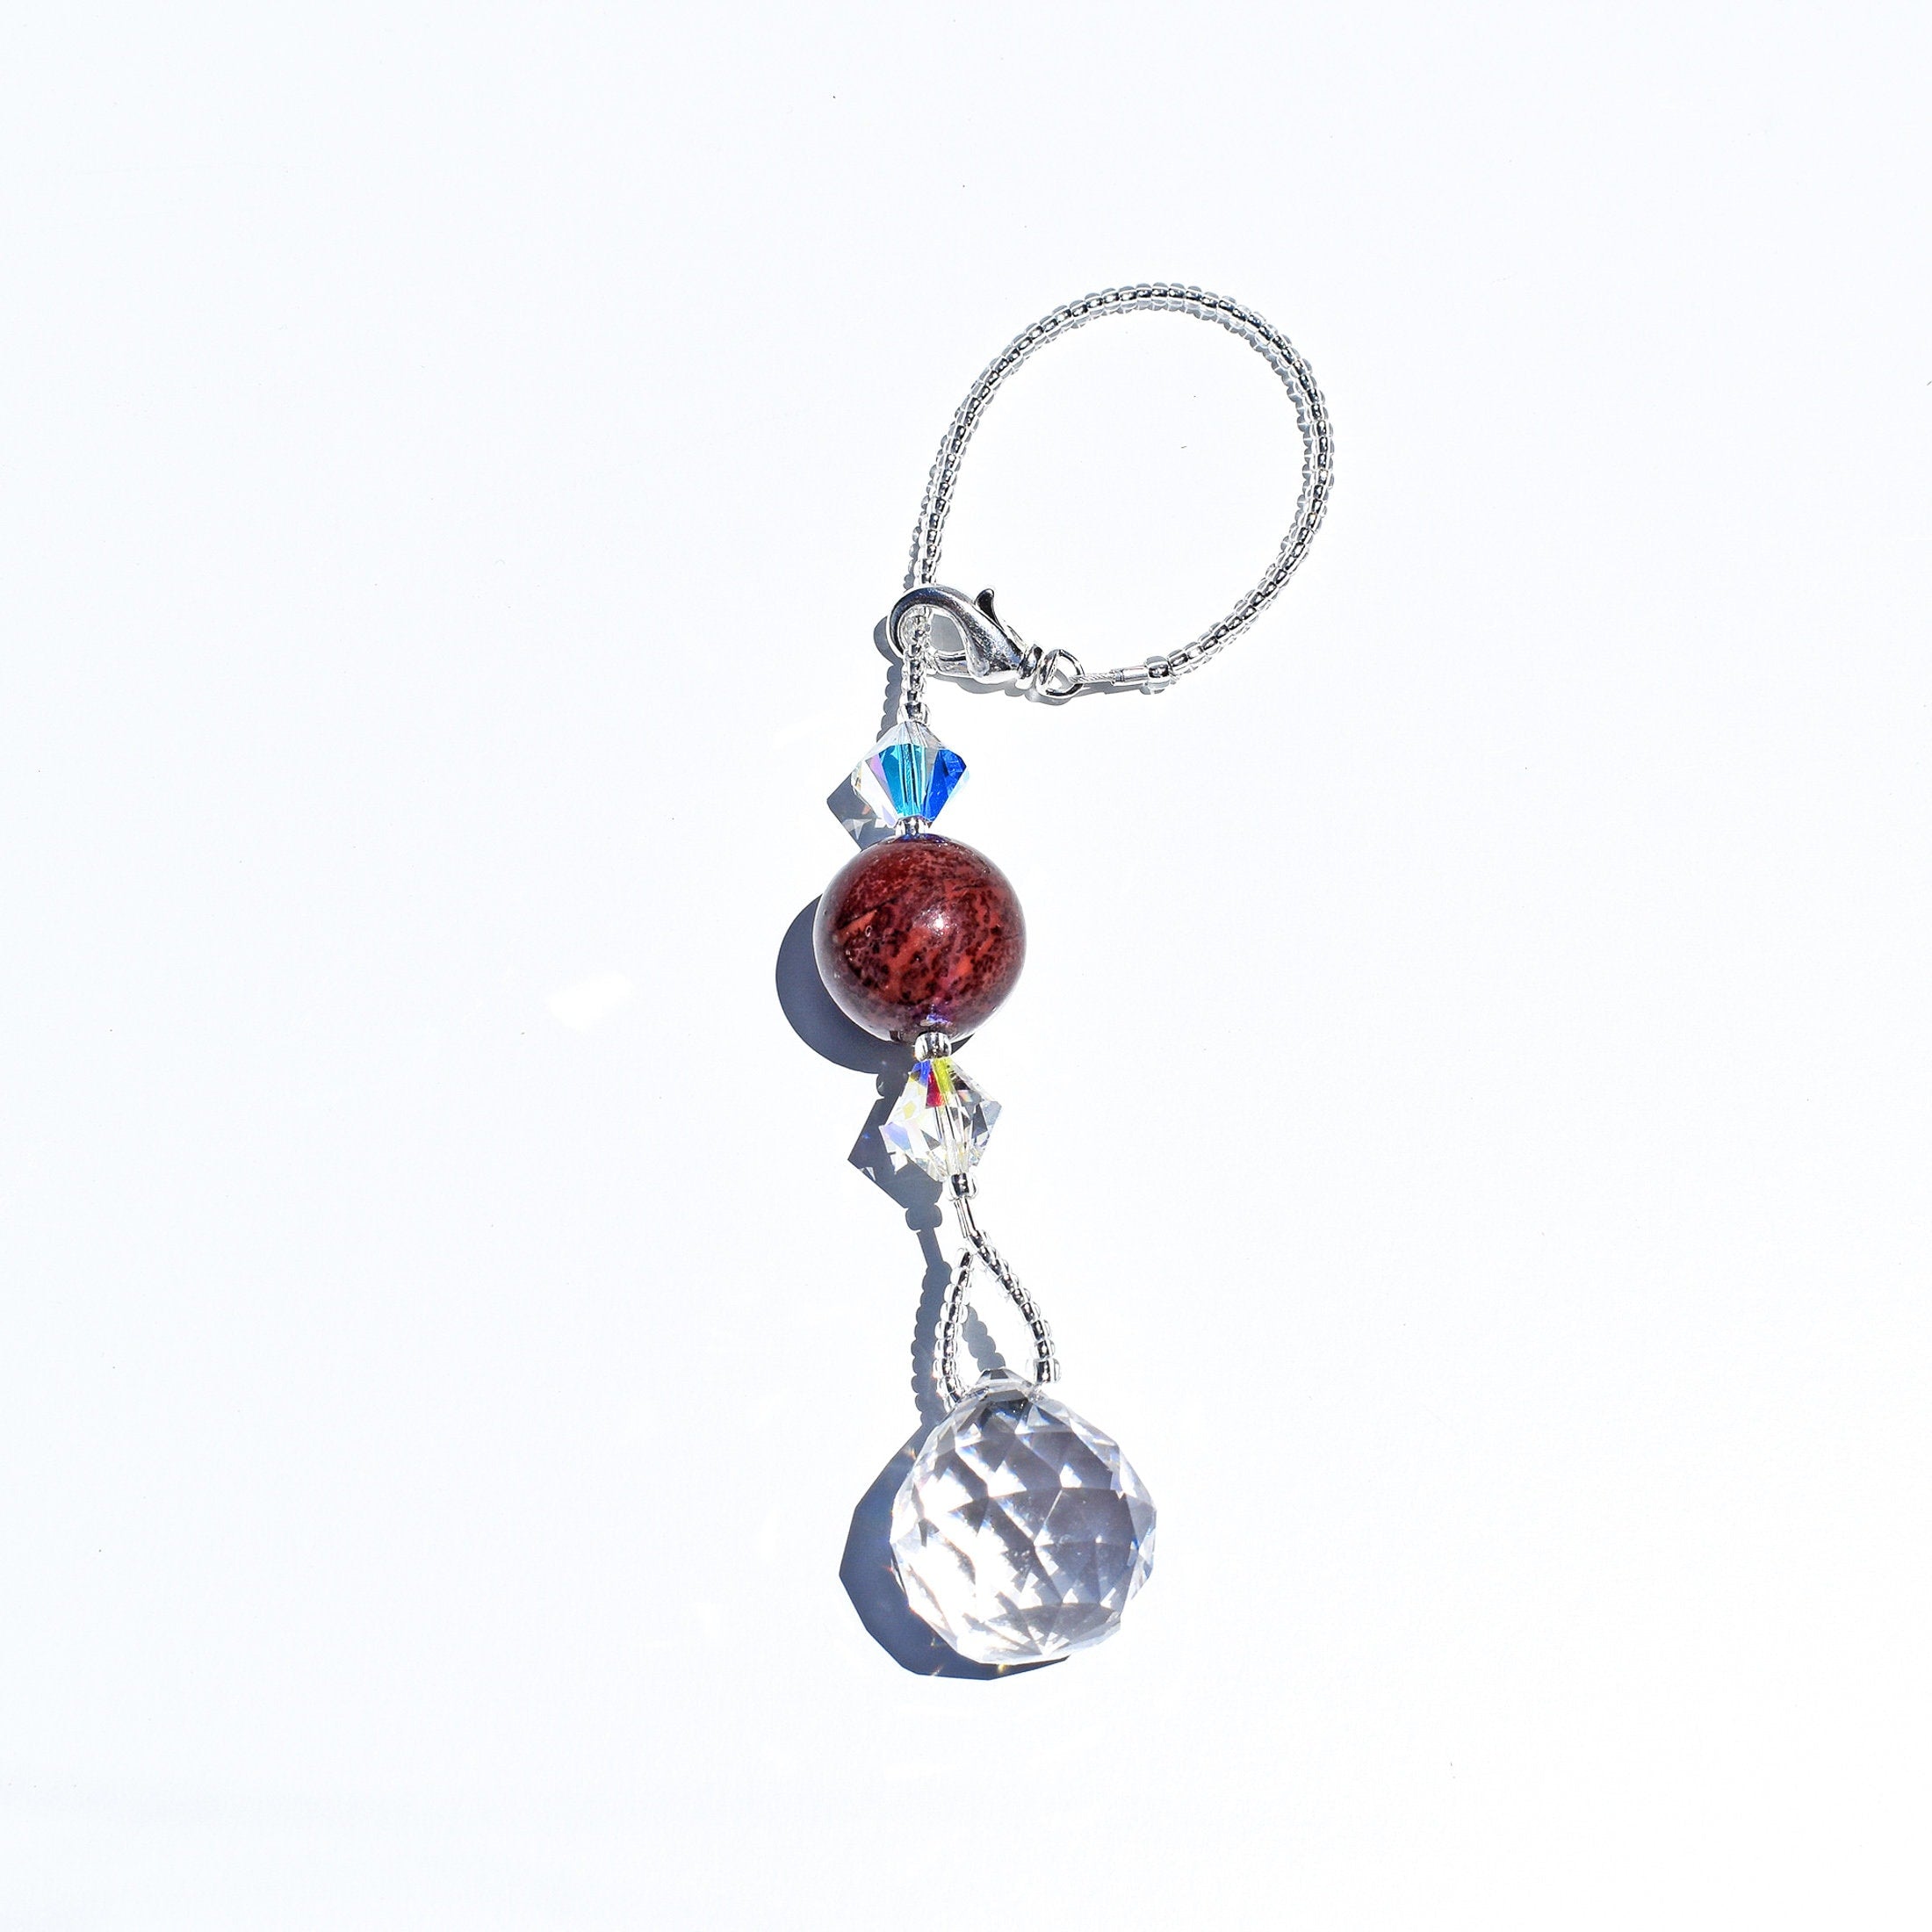 Small sun-catcher strung on wire, laying flat on white background. Includes large zebra jasper stone, flanked by crystal bicone beads, anchored by round crystal prism.